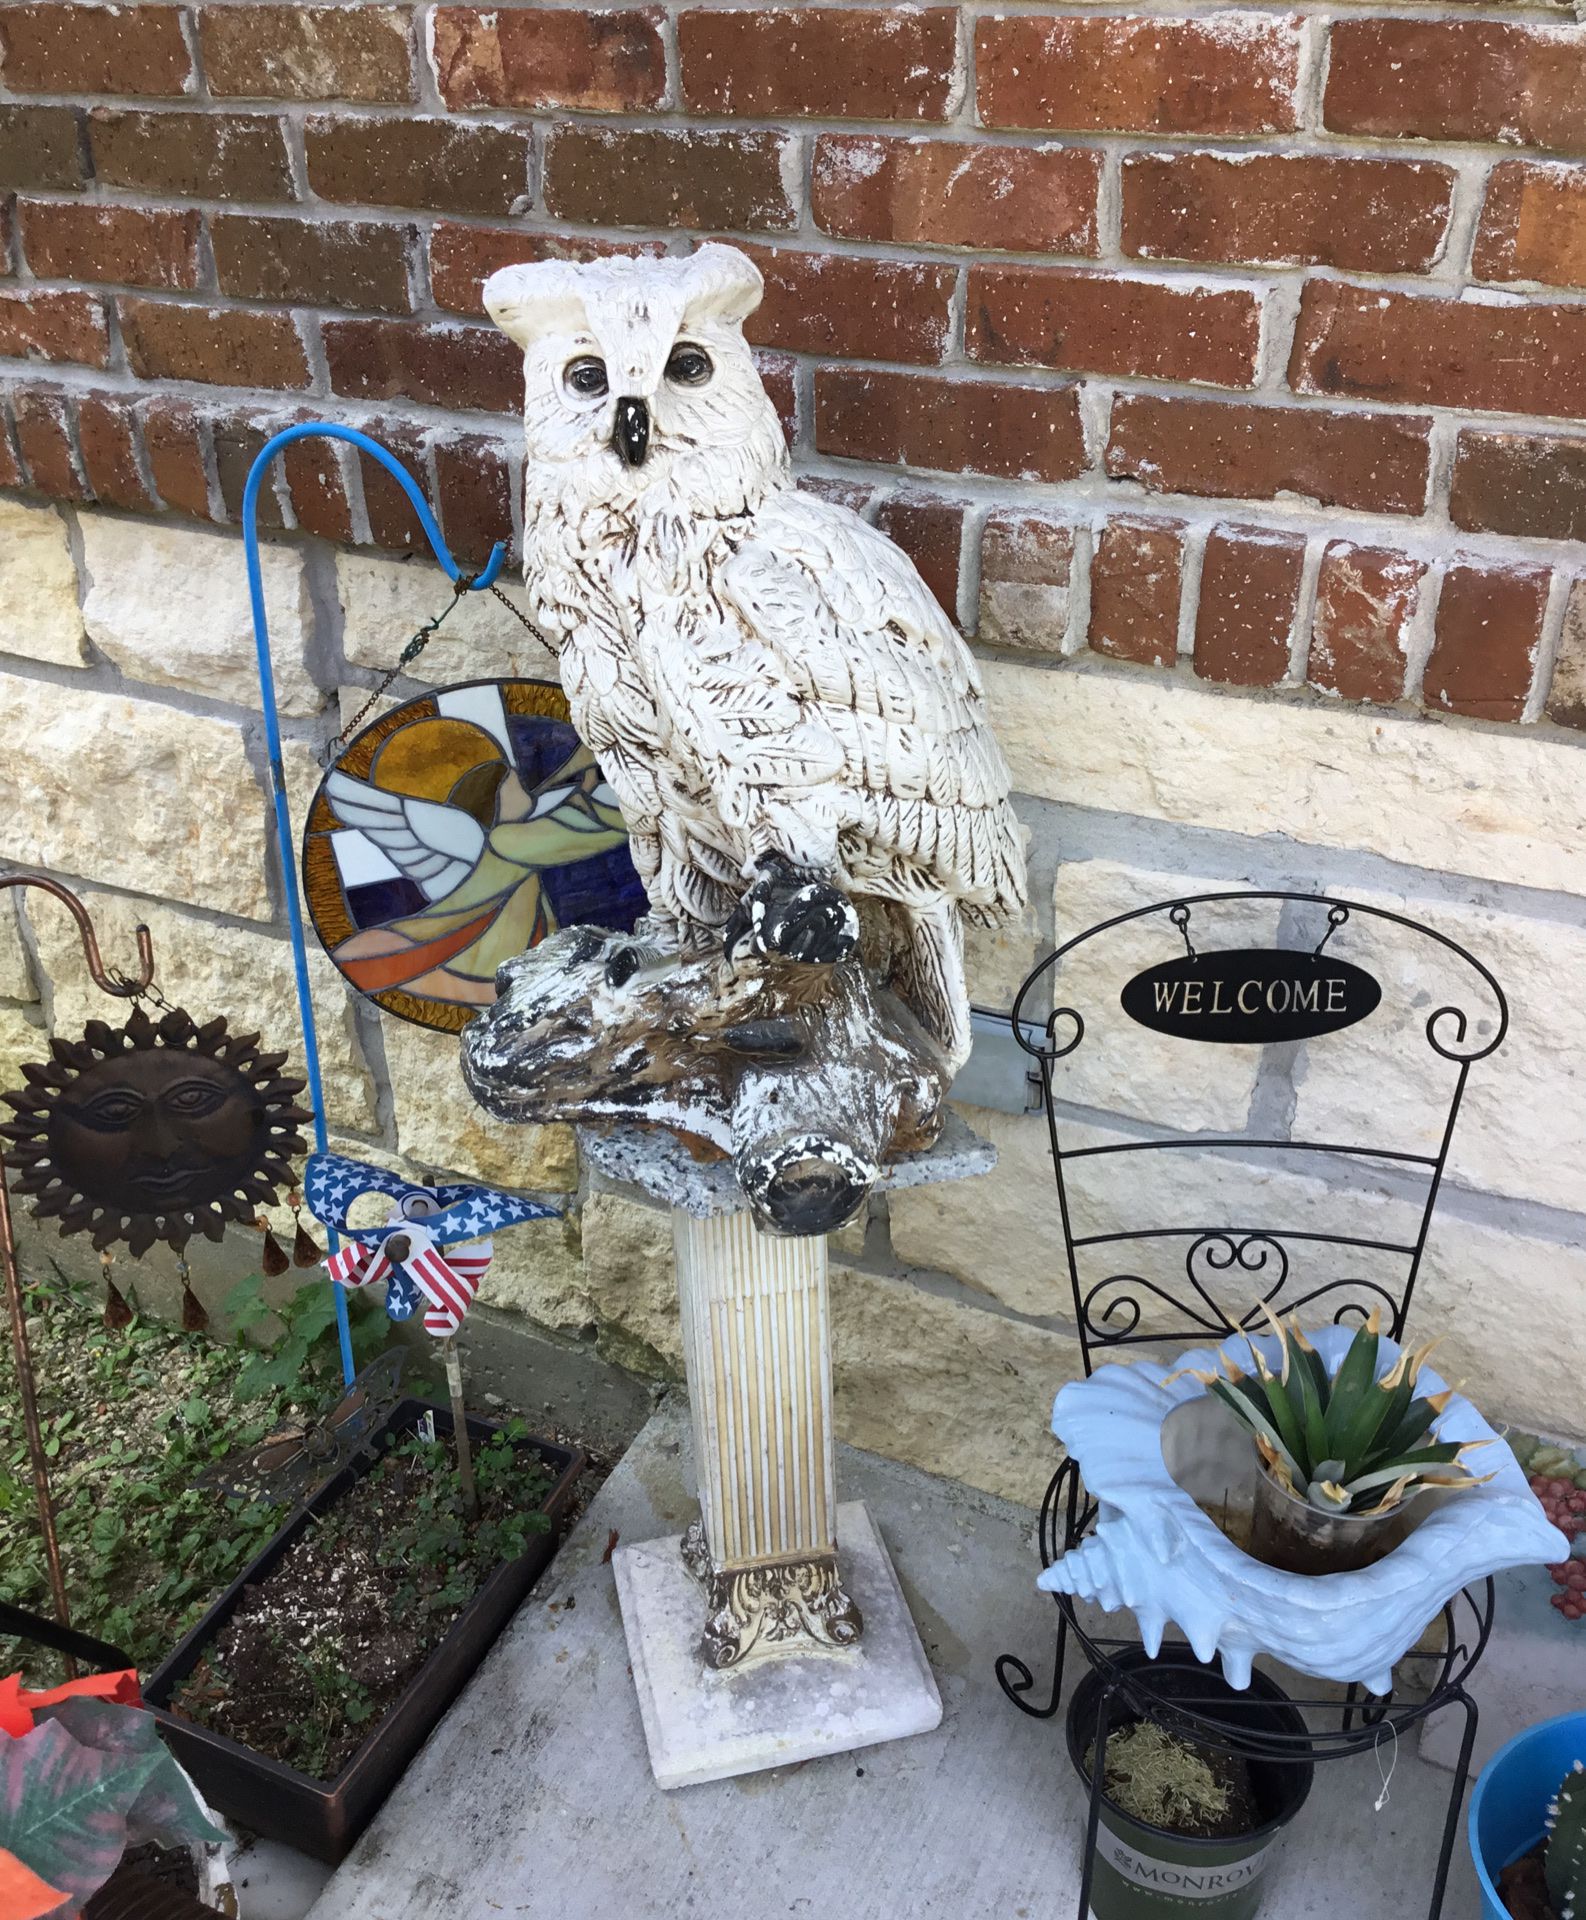 OLD VINTAGE OWL PERCHED ON HOMEMADE COLUMN [STAND]..VERY UNIQUE...OUTDOOR FIXTURE BEING SOLD AS IS...STILL GOT SOME “HOOT” LEFT...